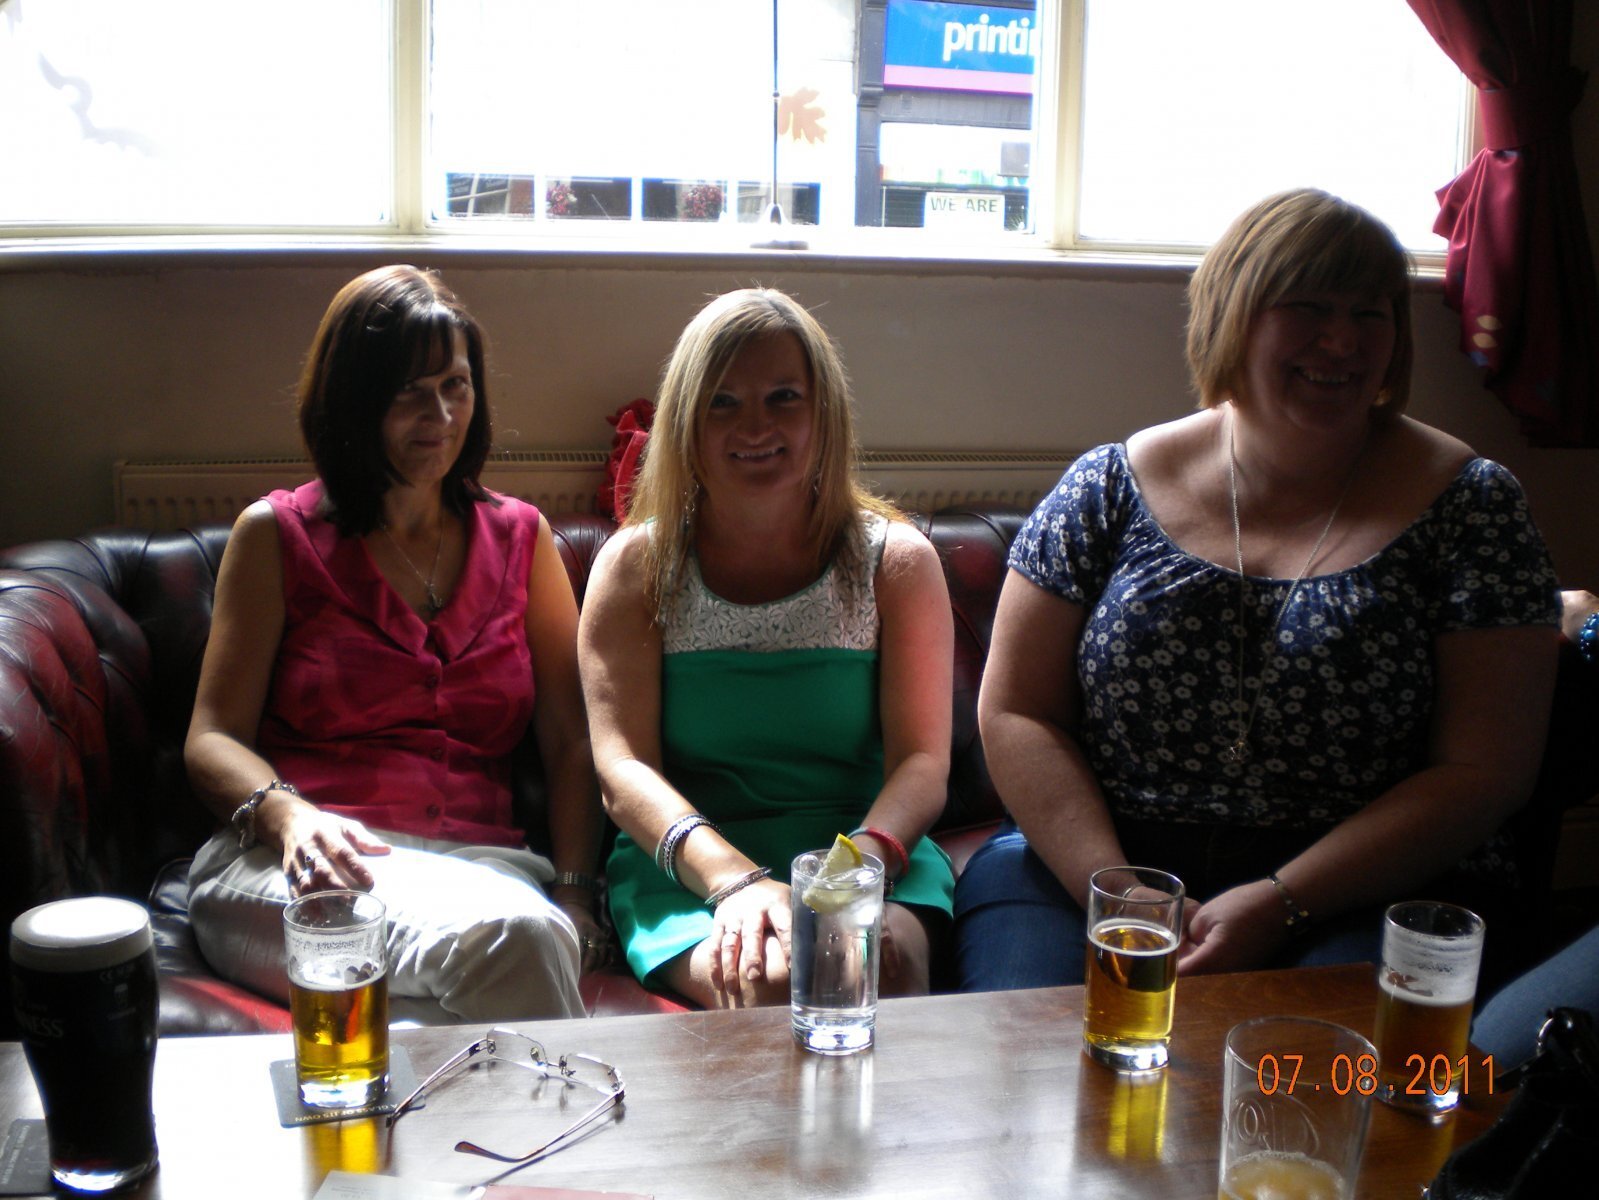 Horse & Groom 7th August 2011